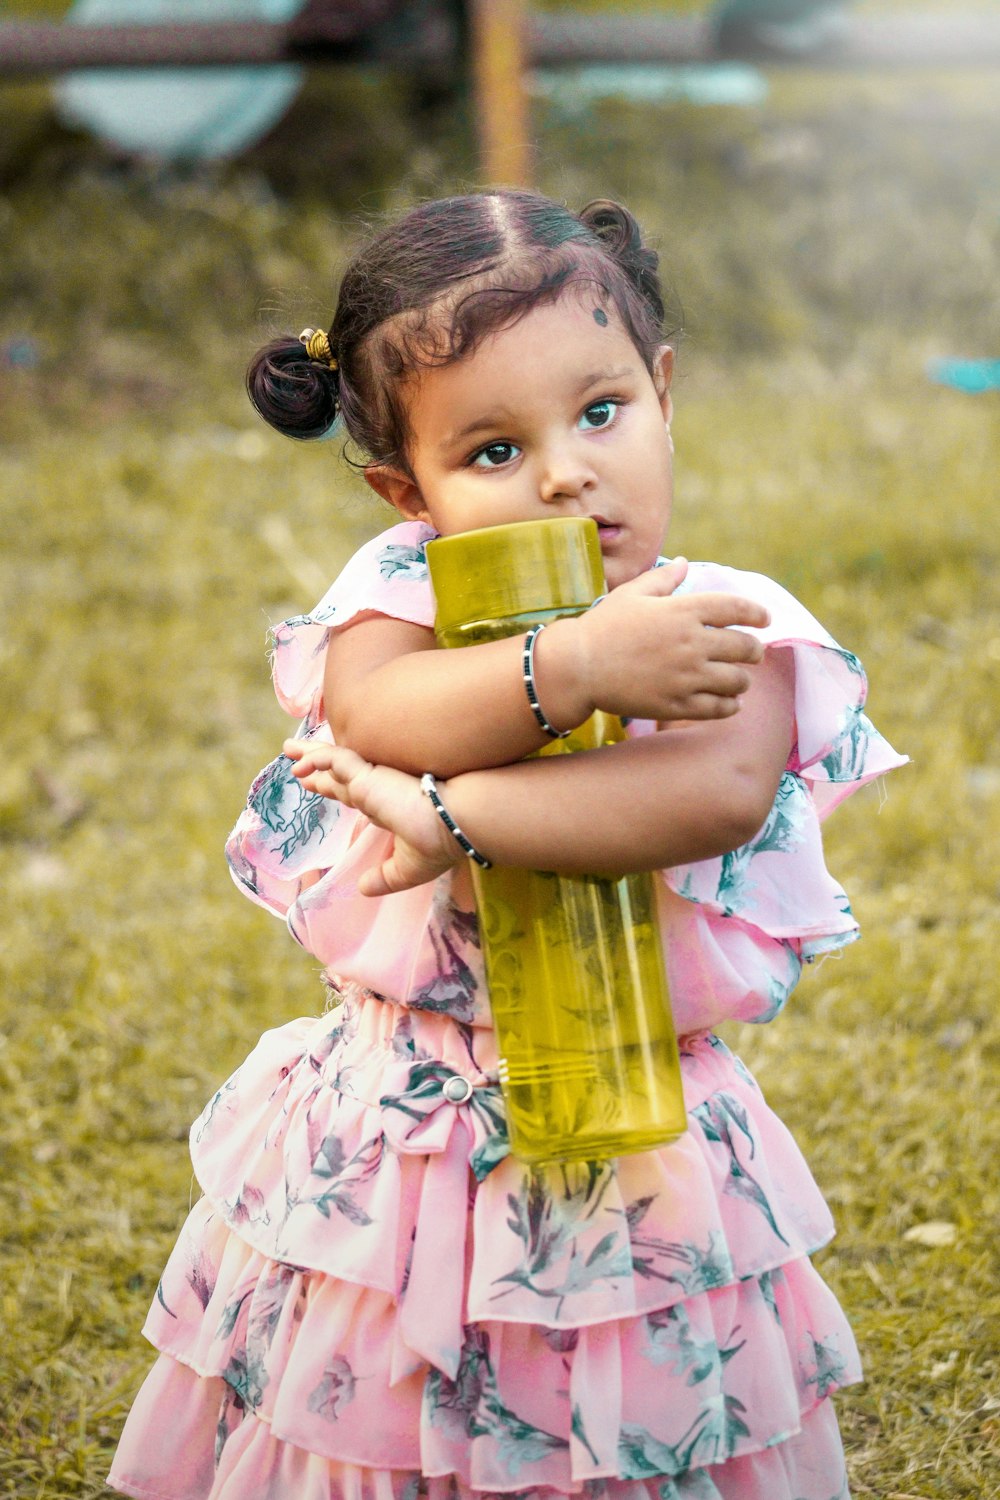 a little girl holding a yellow cup in her hands